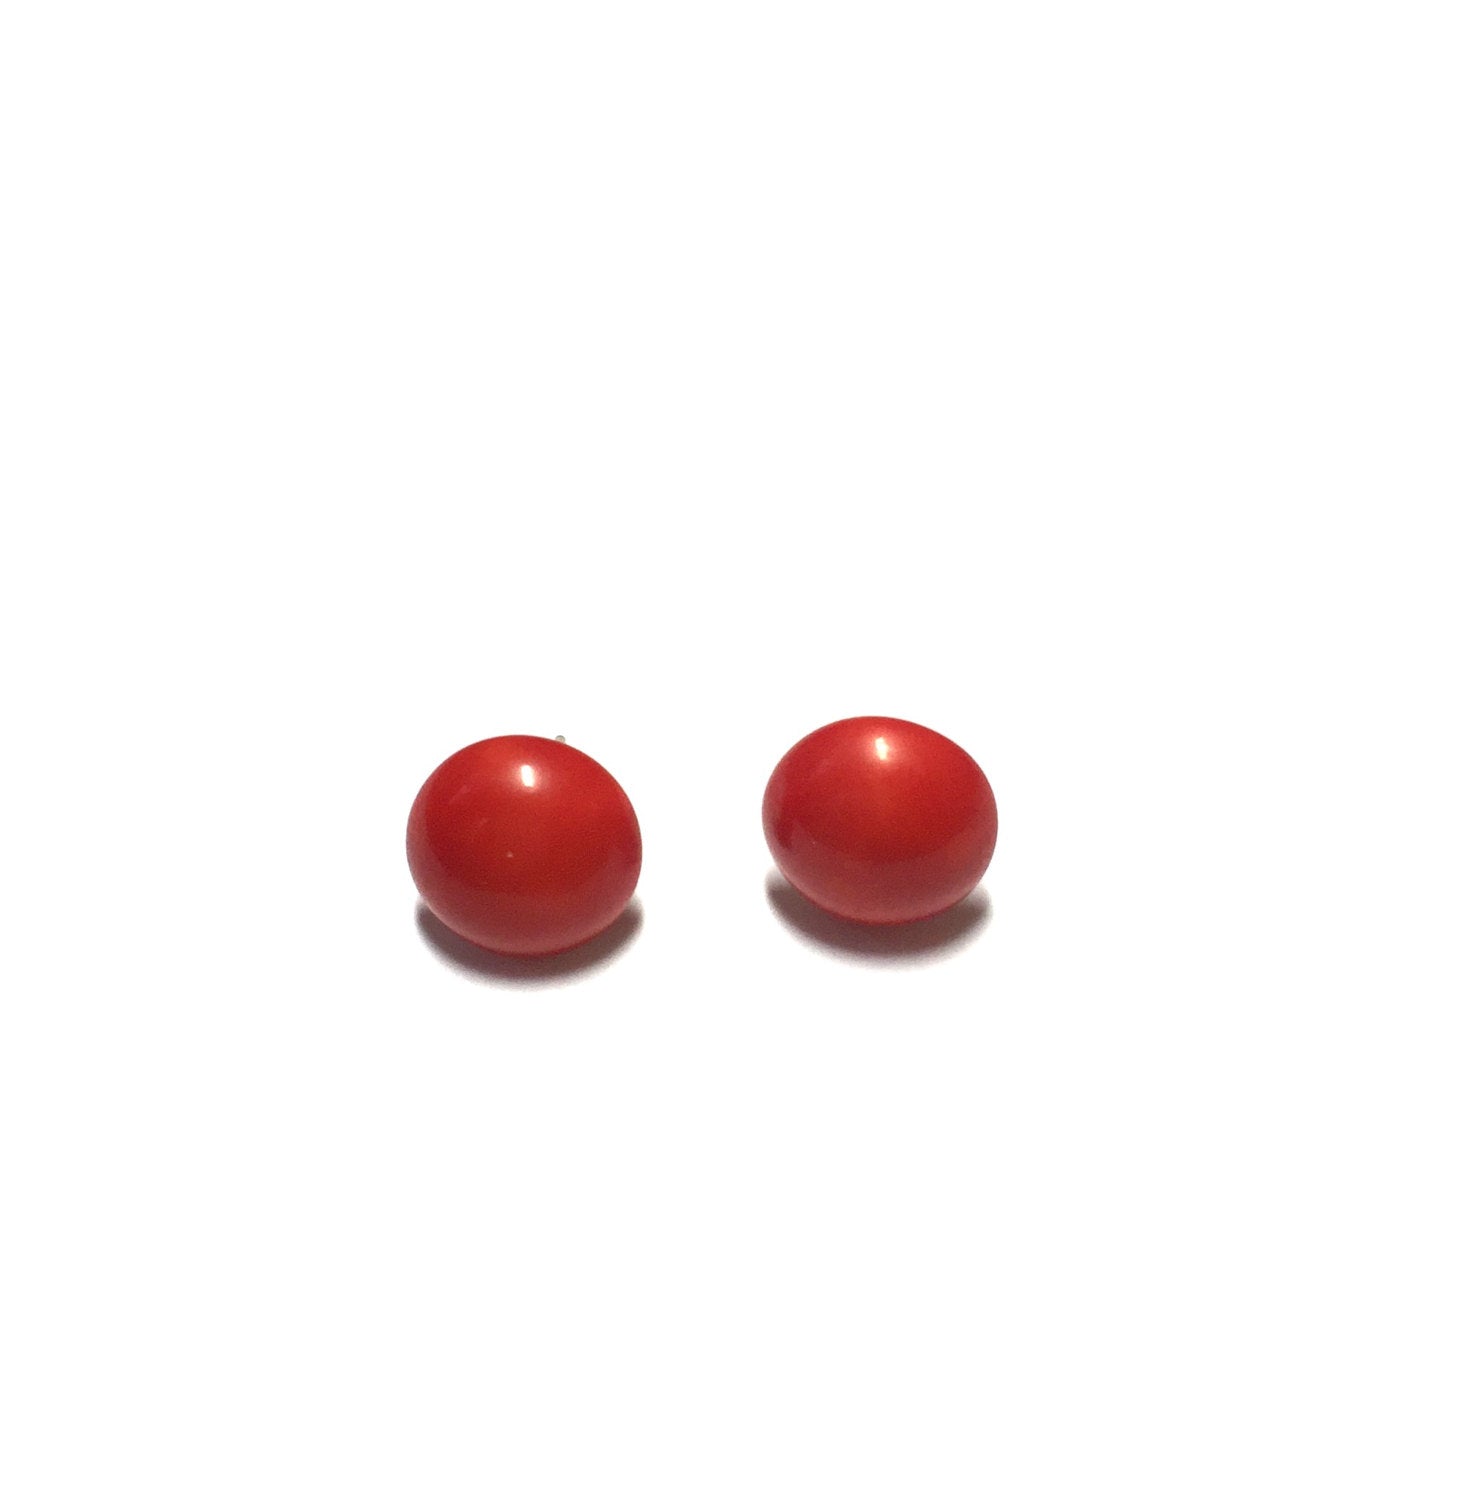 bright red button earrings